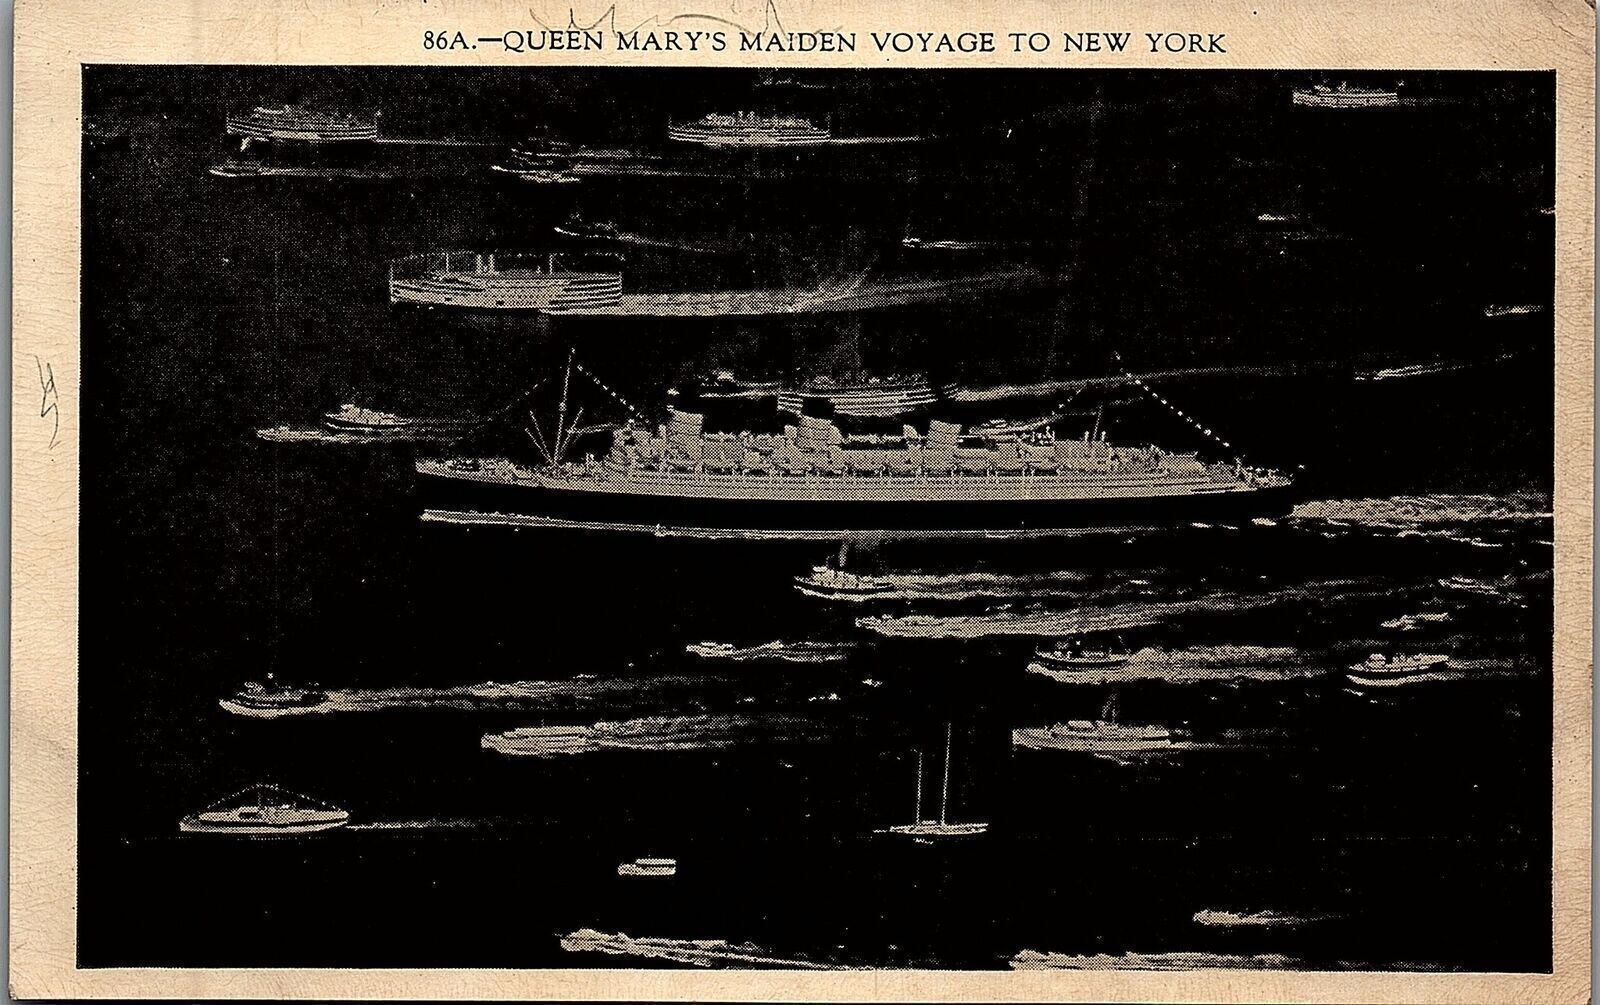 MAY 1936 QUEEN MARY'S MAIDEN VOYAGE TO NEW YORK CUNARD LINES POSTCARD 29-92